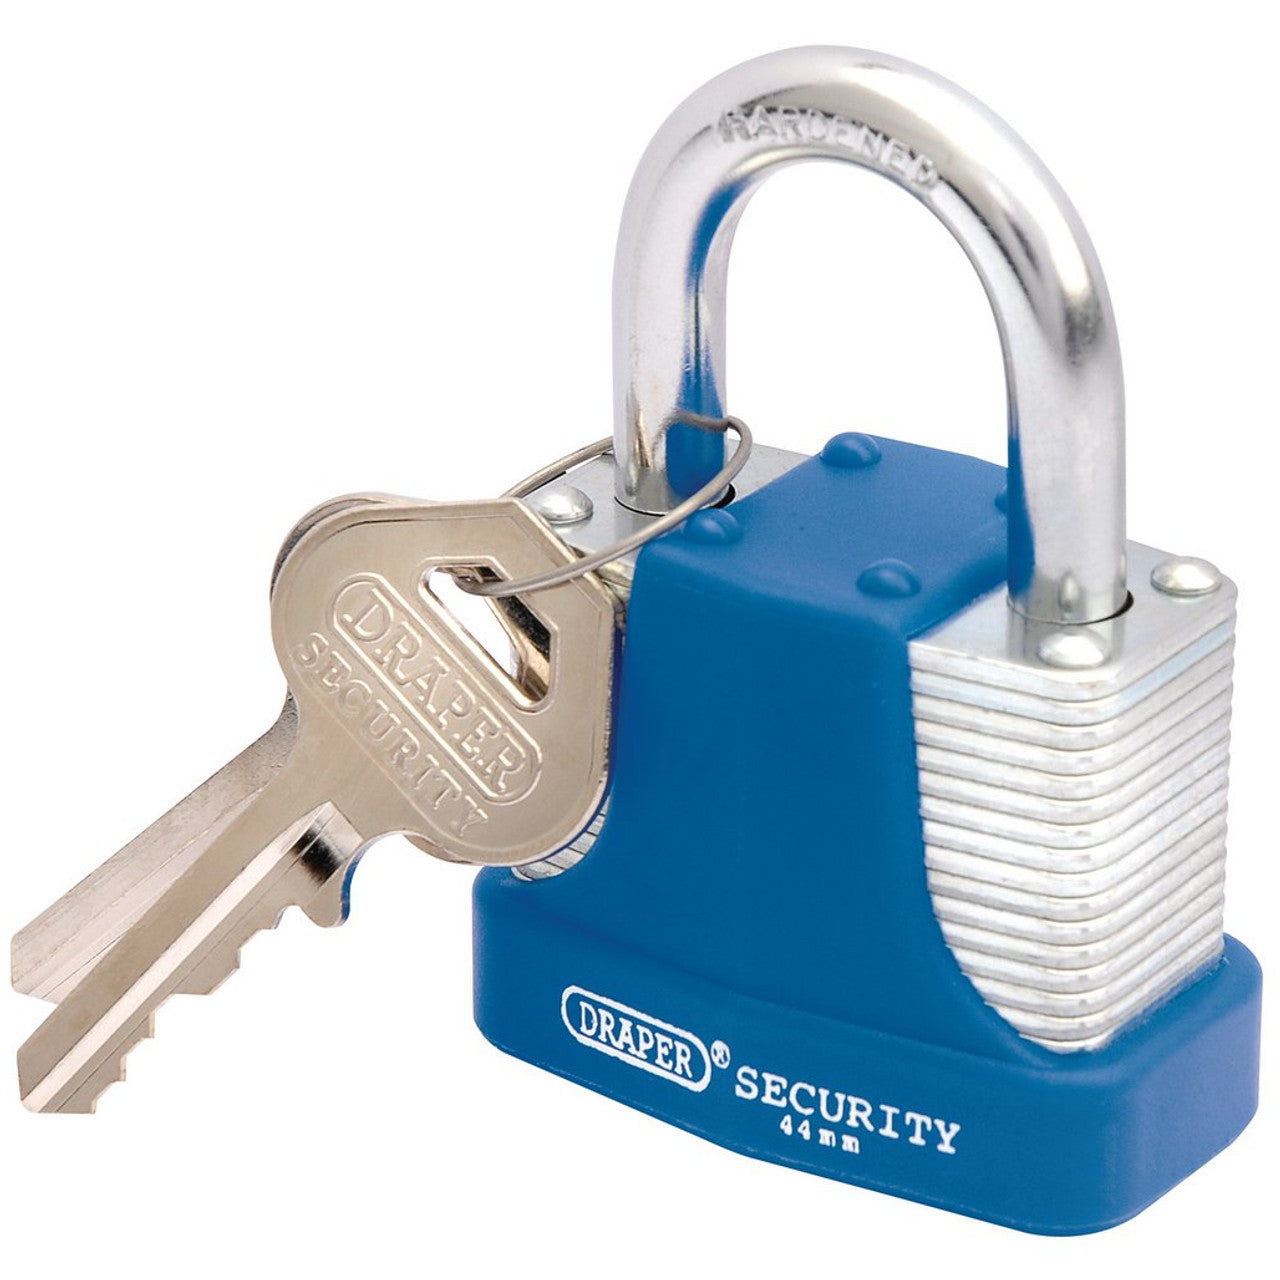 Draper 64181 Laminated Steel Padlock and 2 Keys with Hardened Steel Shackle and Bumper, 44mm